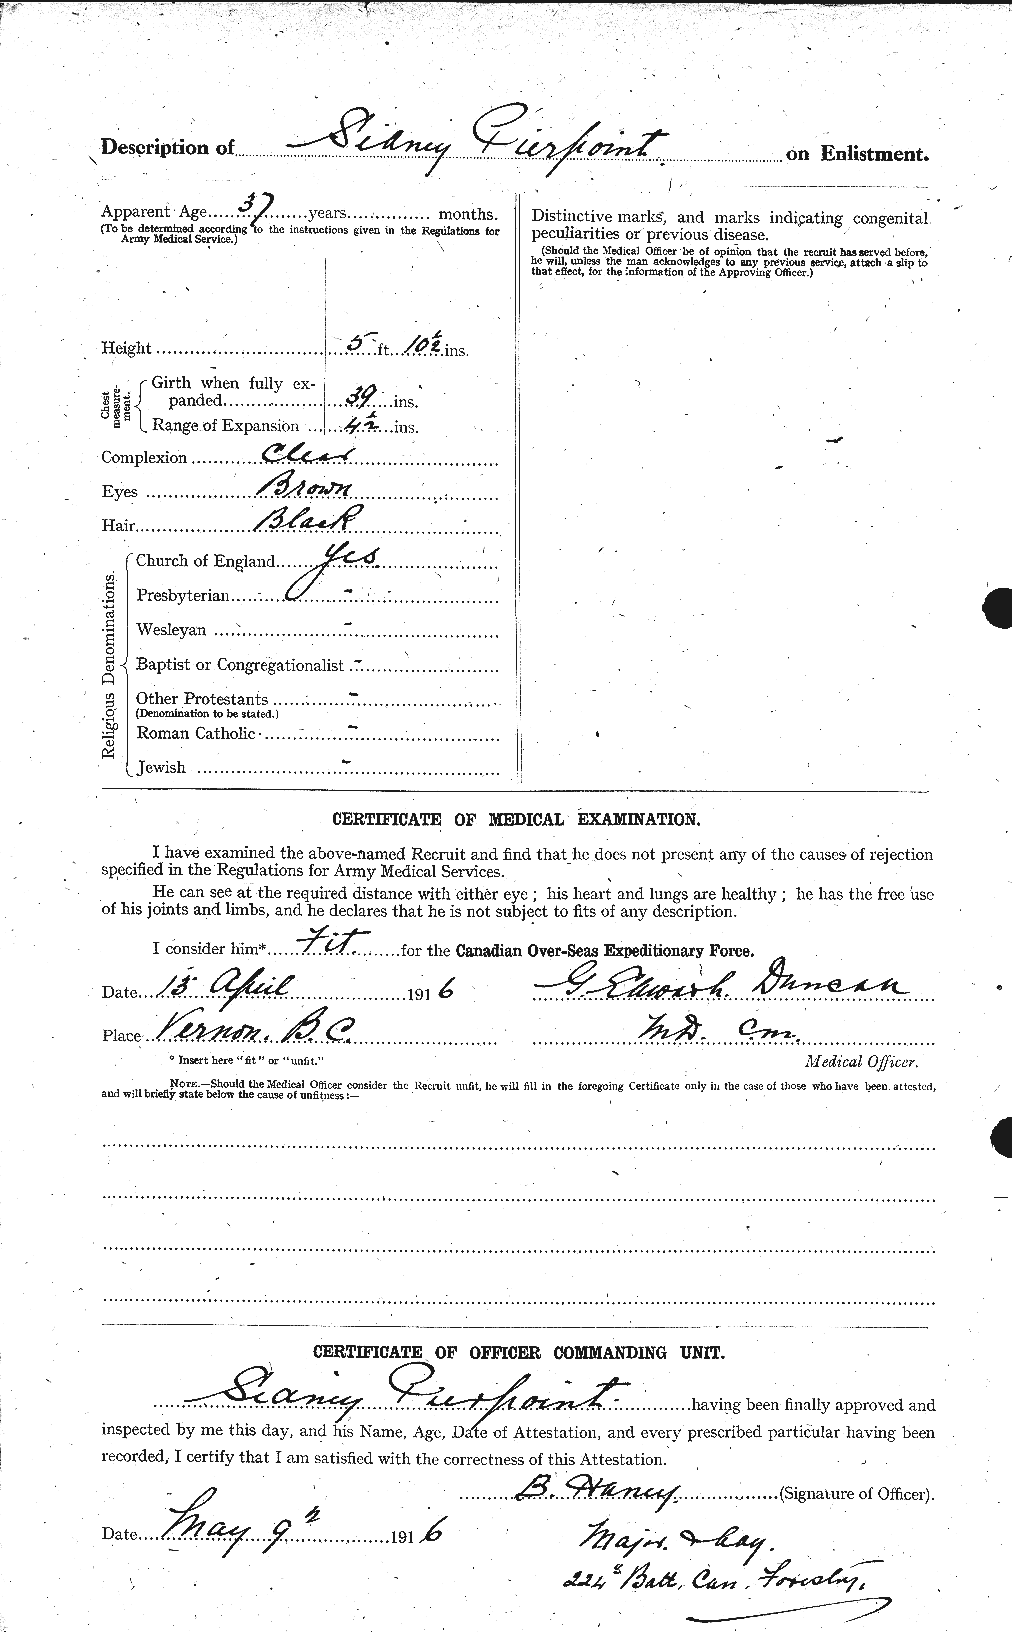 Personnel Records of the First World War - CEF 580940b